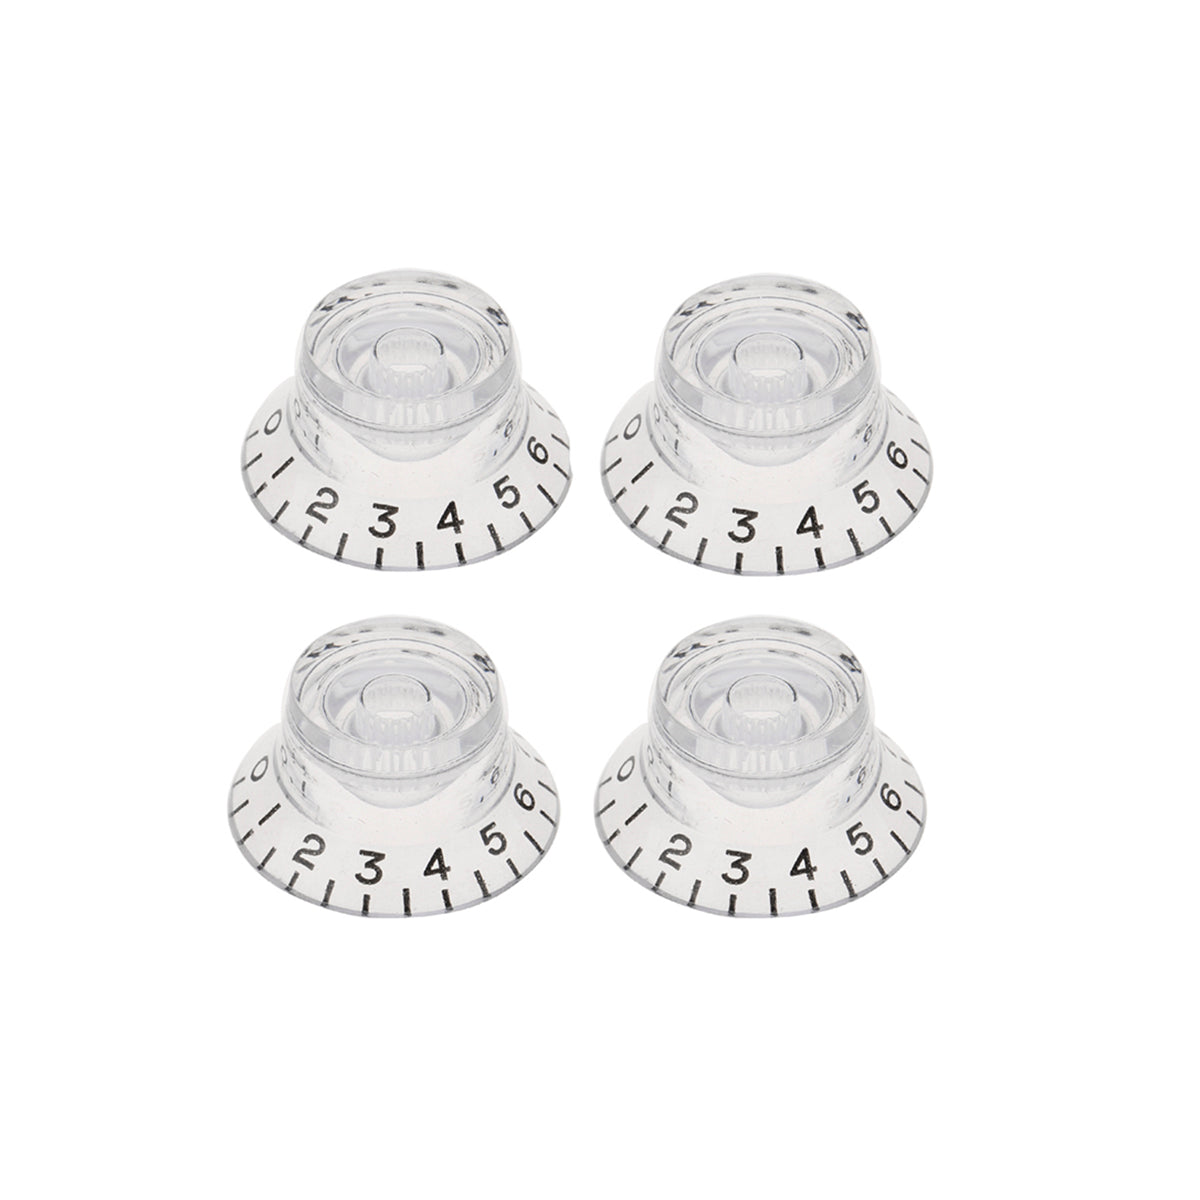 Musiclily Metric 6mm Top Hat LP Style Guitar Speed Control Knobs,Transparent with Black Number (4 Pieces)